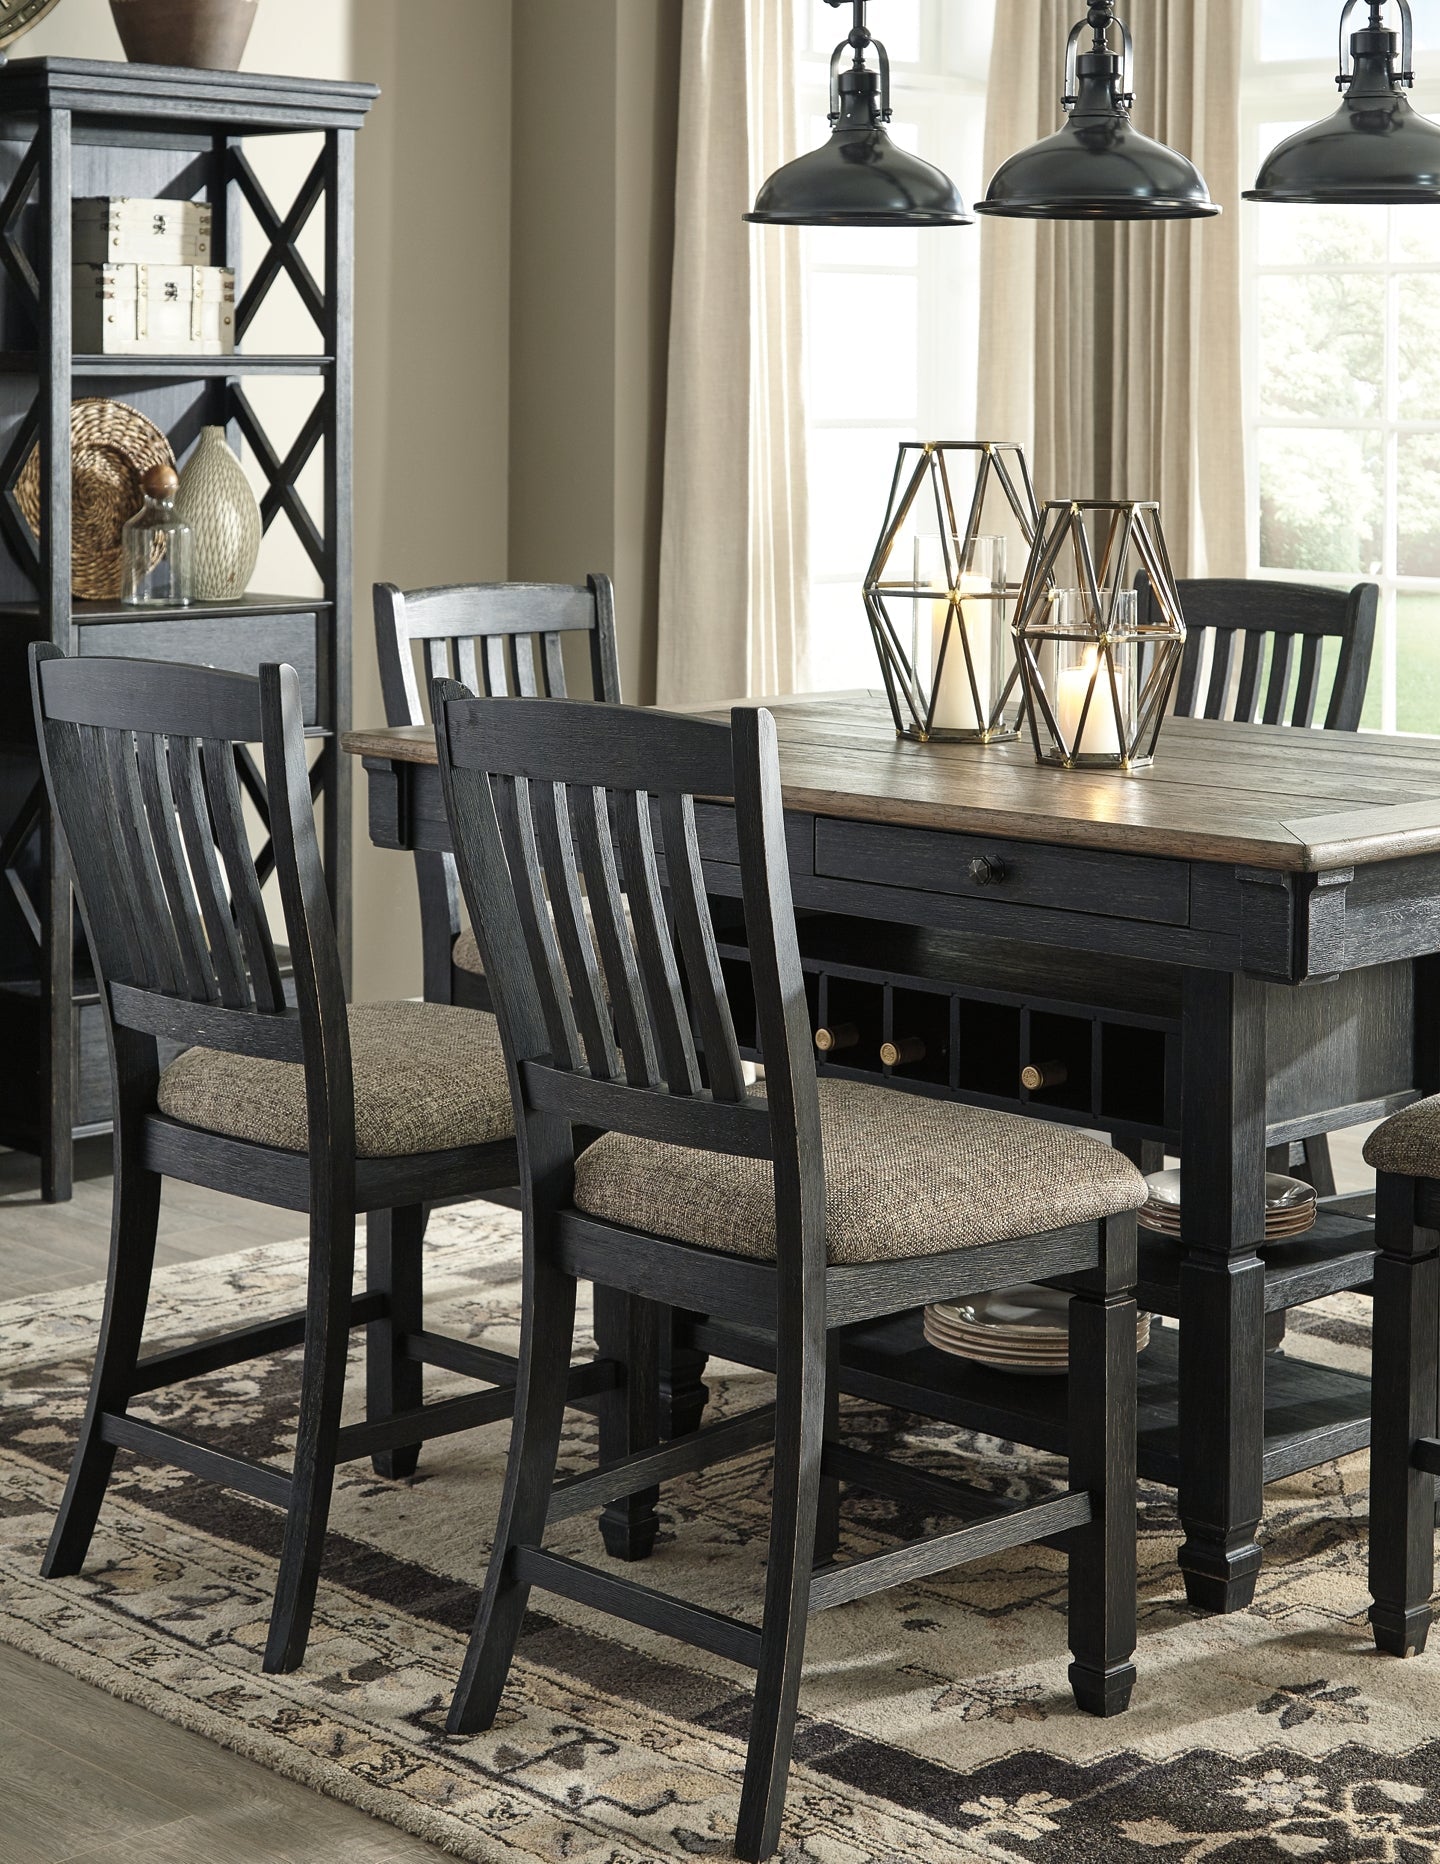 Tyler Creek Counter Height Dining Table and 4 Barstools Rent Wise Rent To Own Jacksonville, Florida